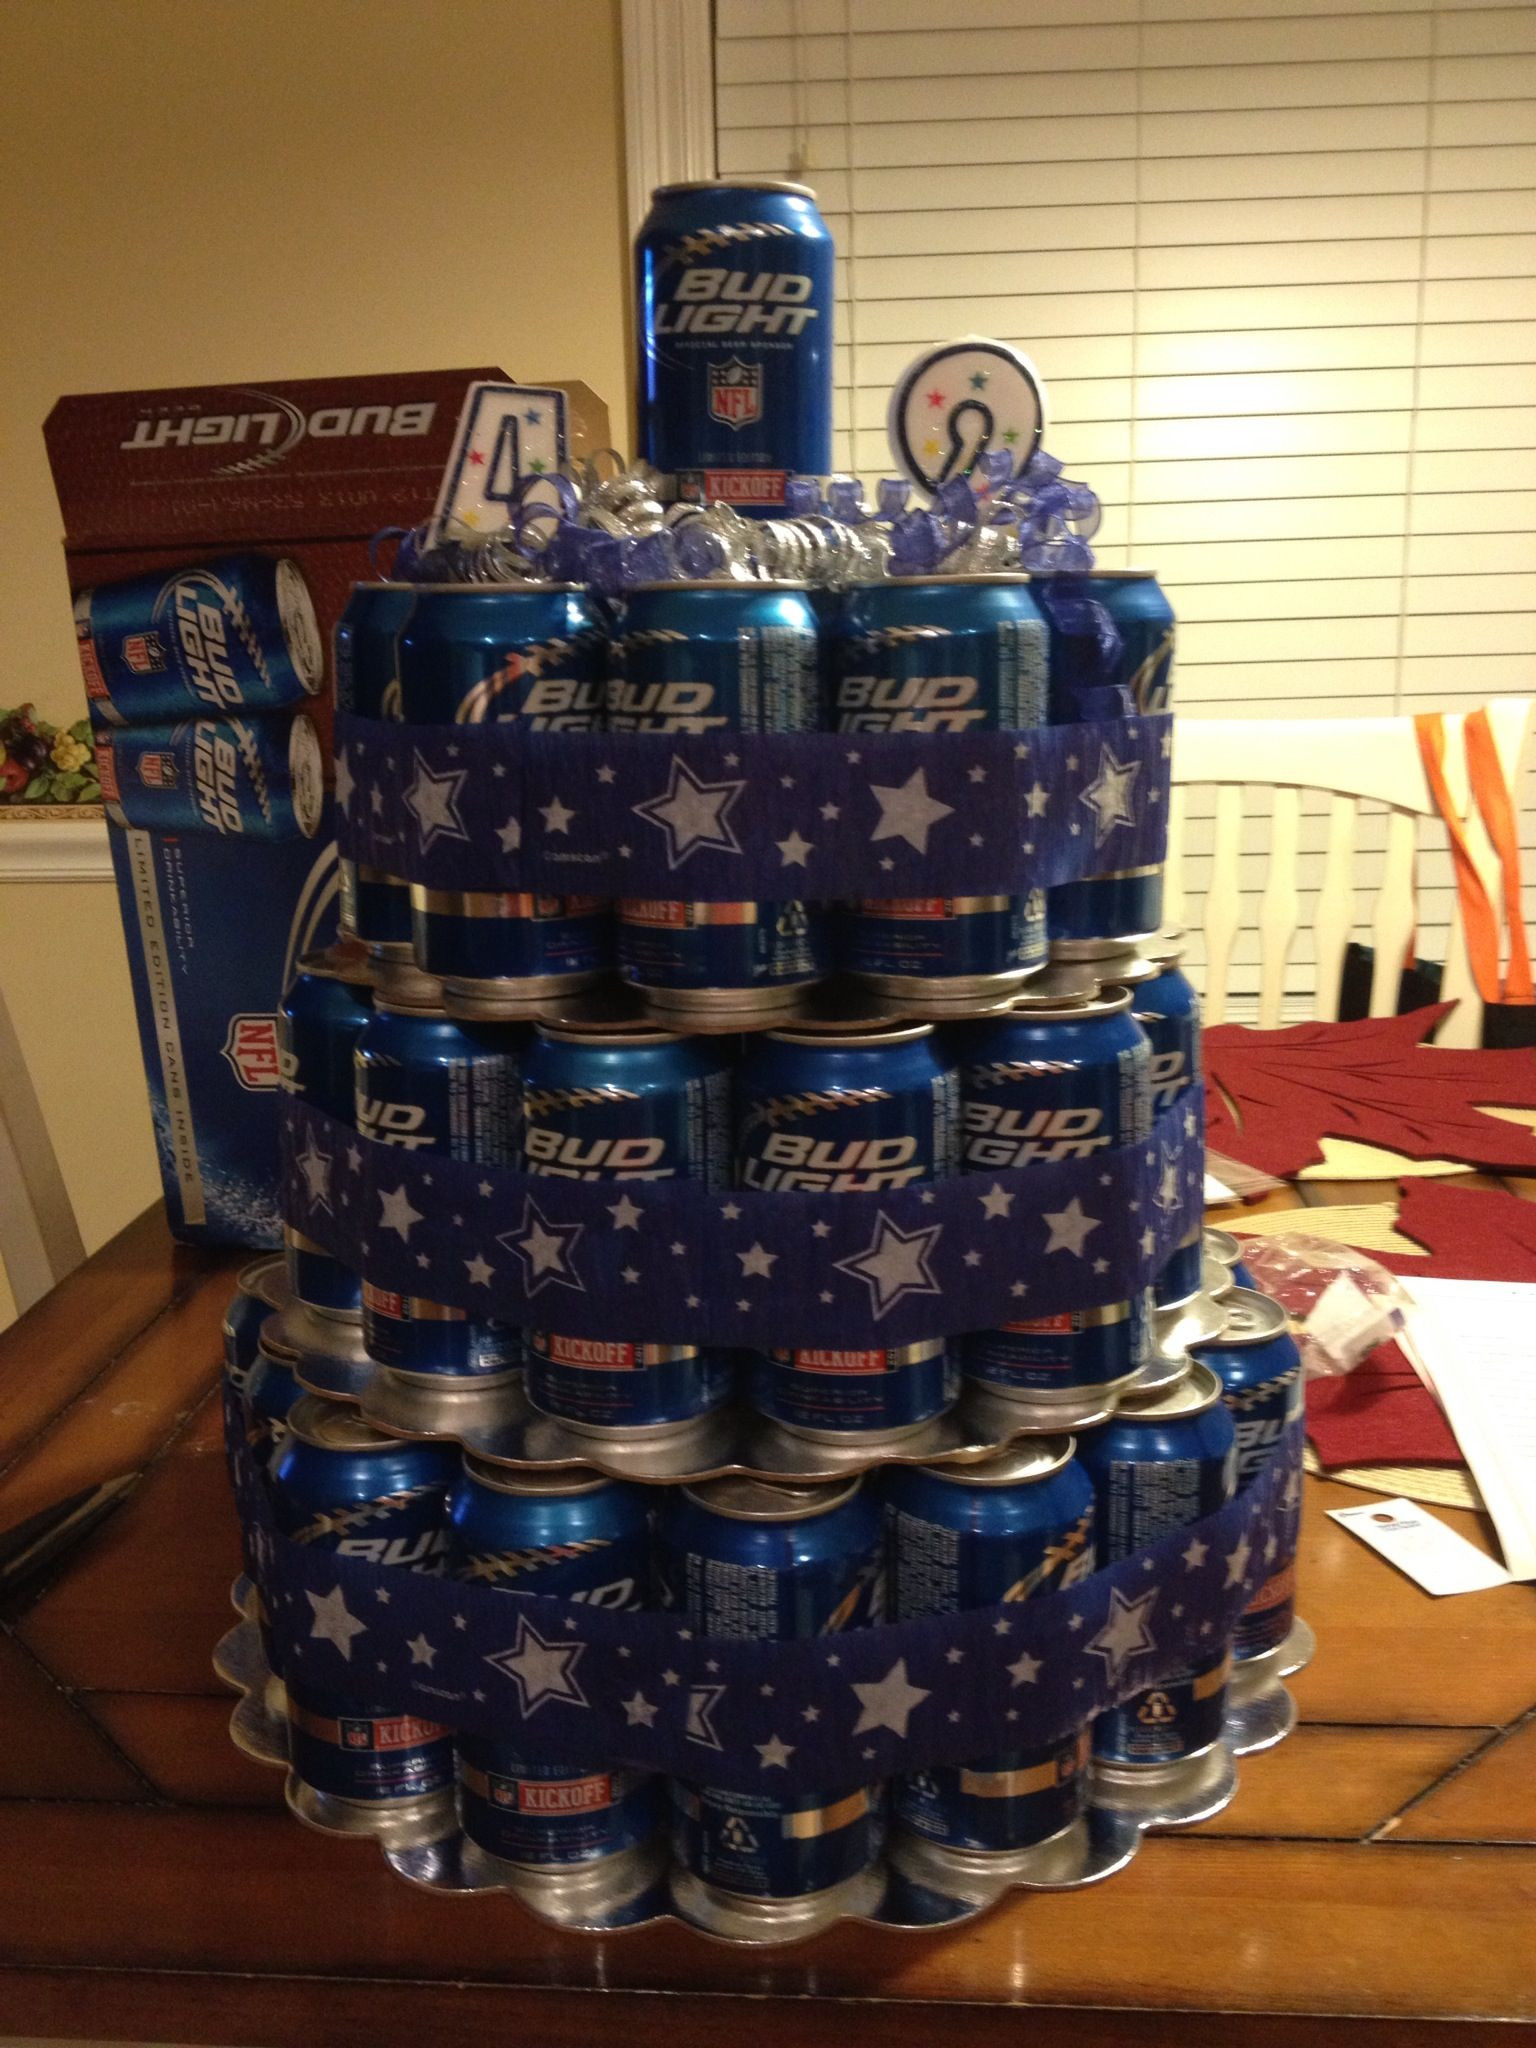 Dallas Cowboys Birthday Gift Ideas
 Beer Can Cake with Dallas Cowboys Ribbon This was my